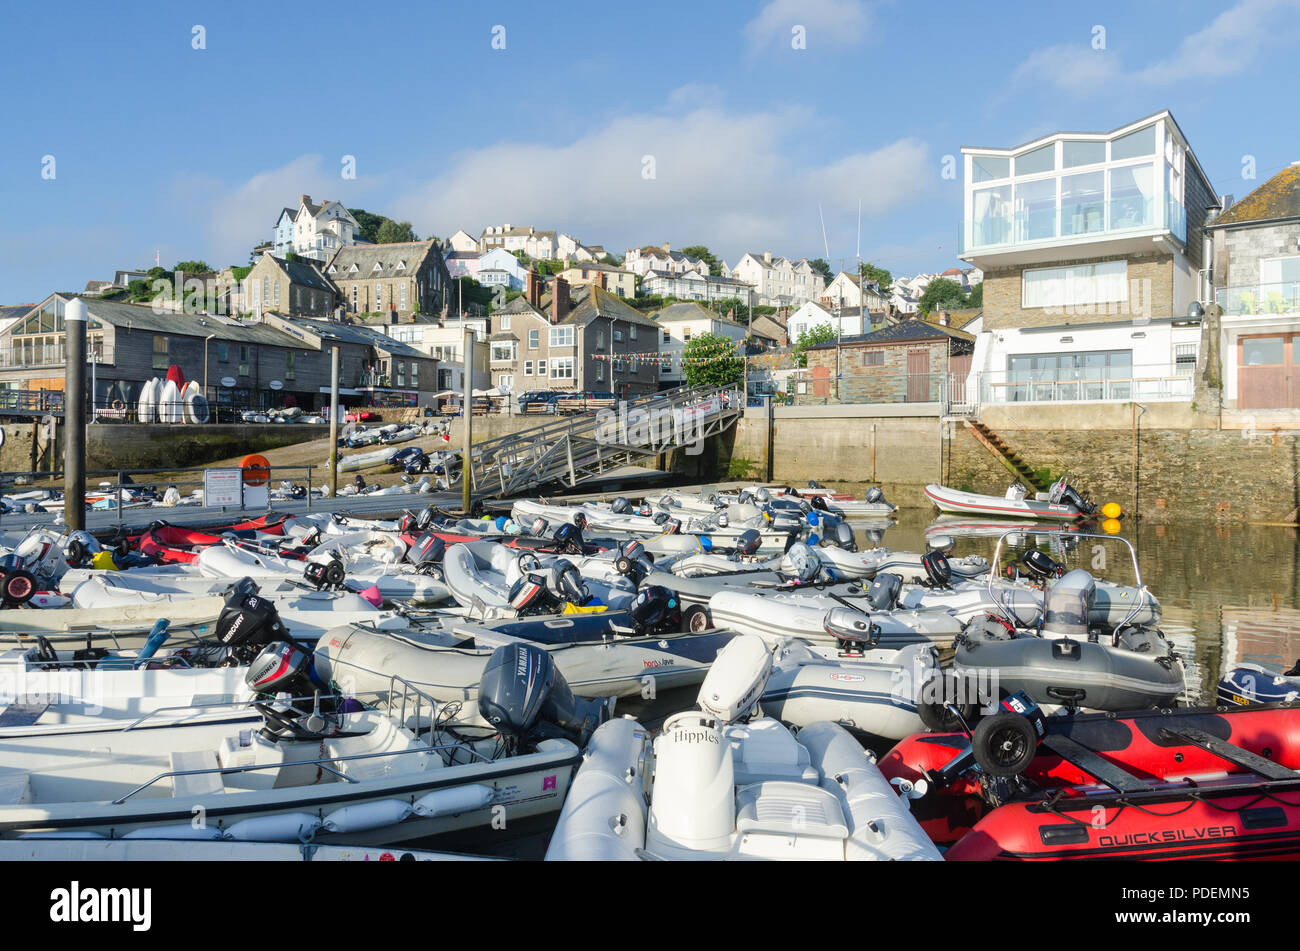 Tenders and dinghies moored on the harbour pontoon in the pretty sailing town of Salcombe in the South Hams,Devon,England Stock Photo